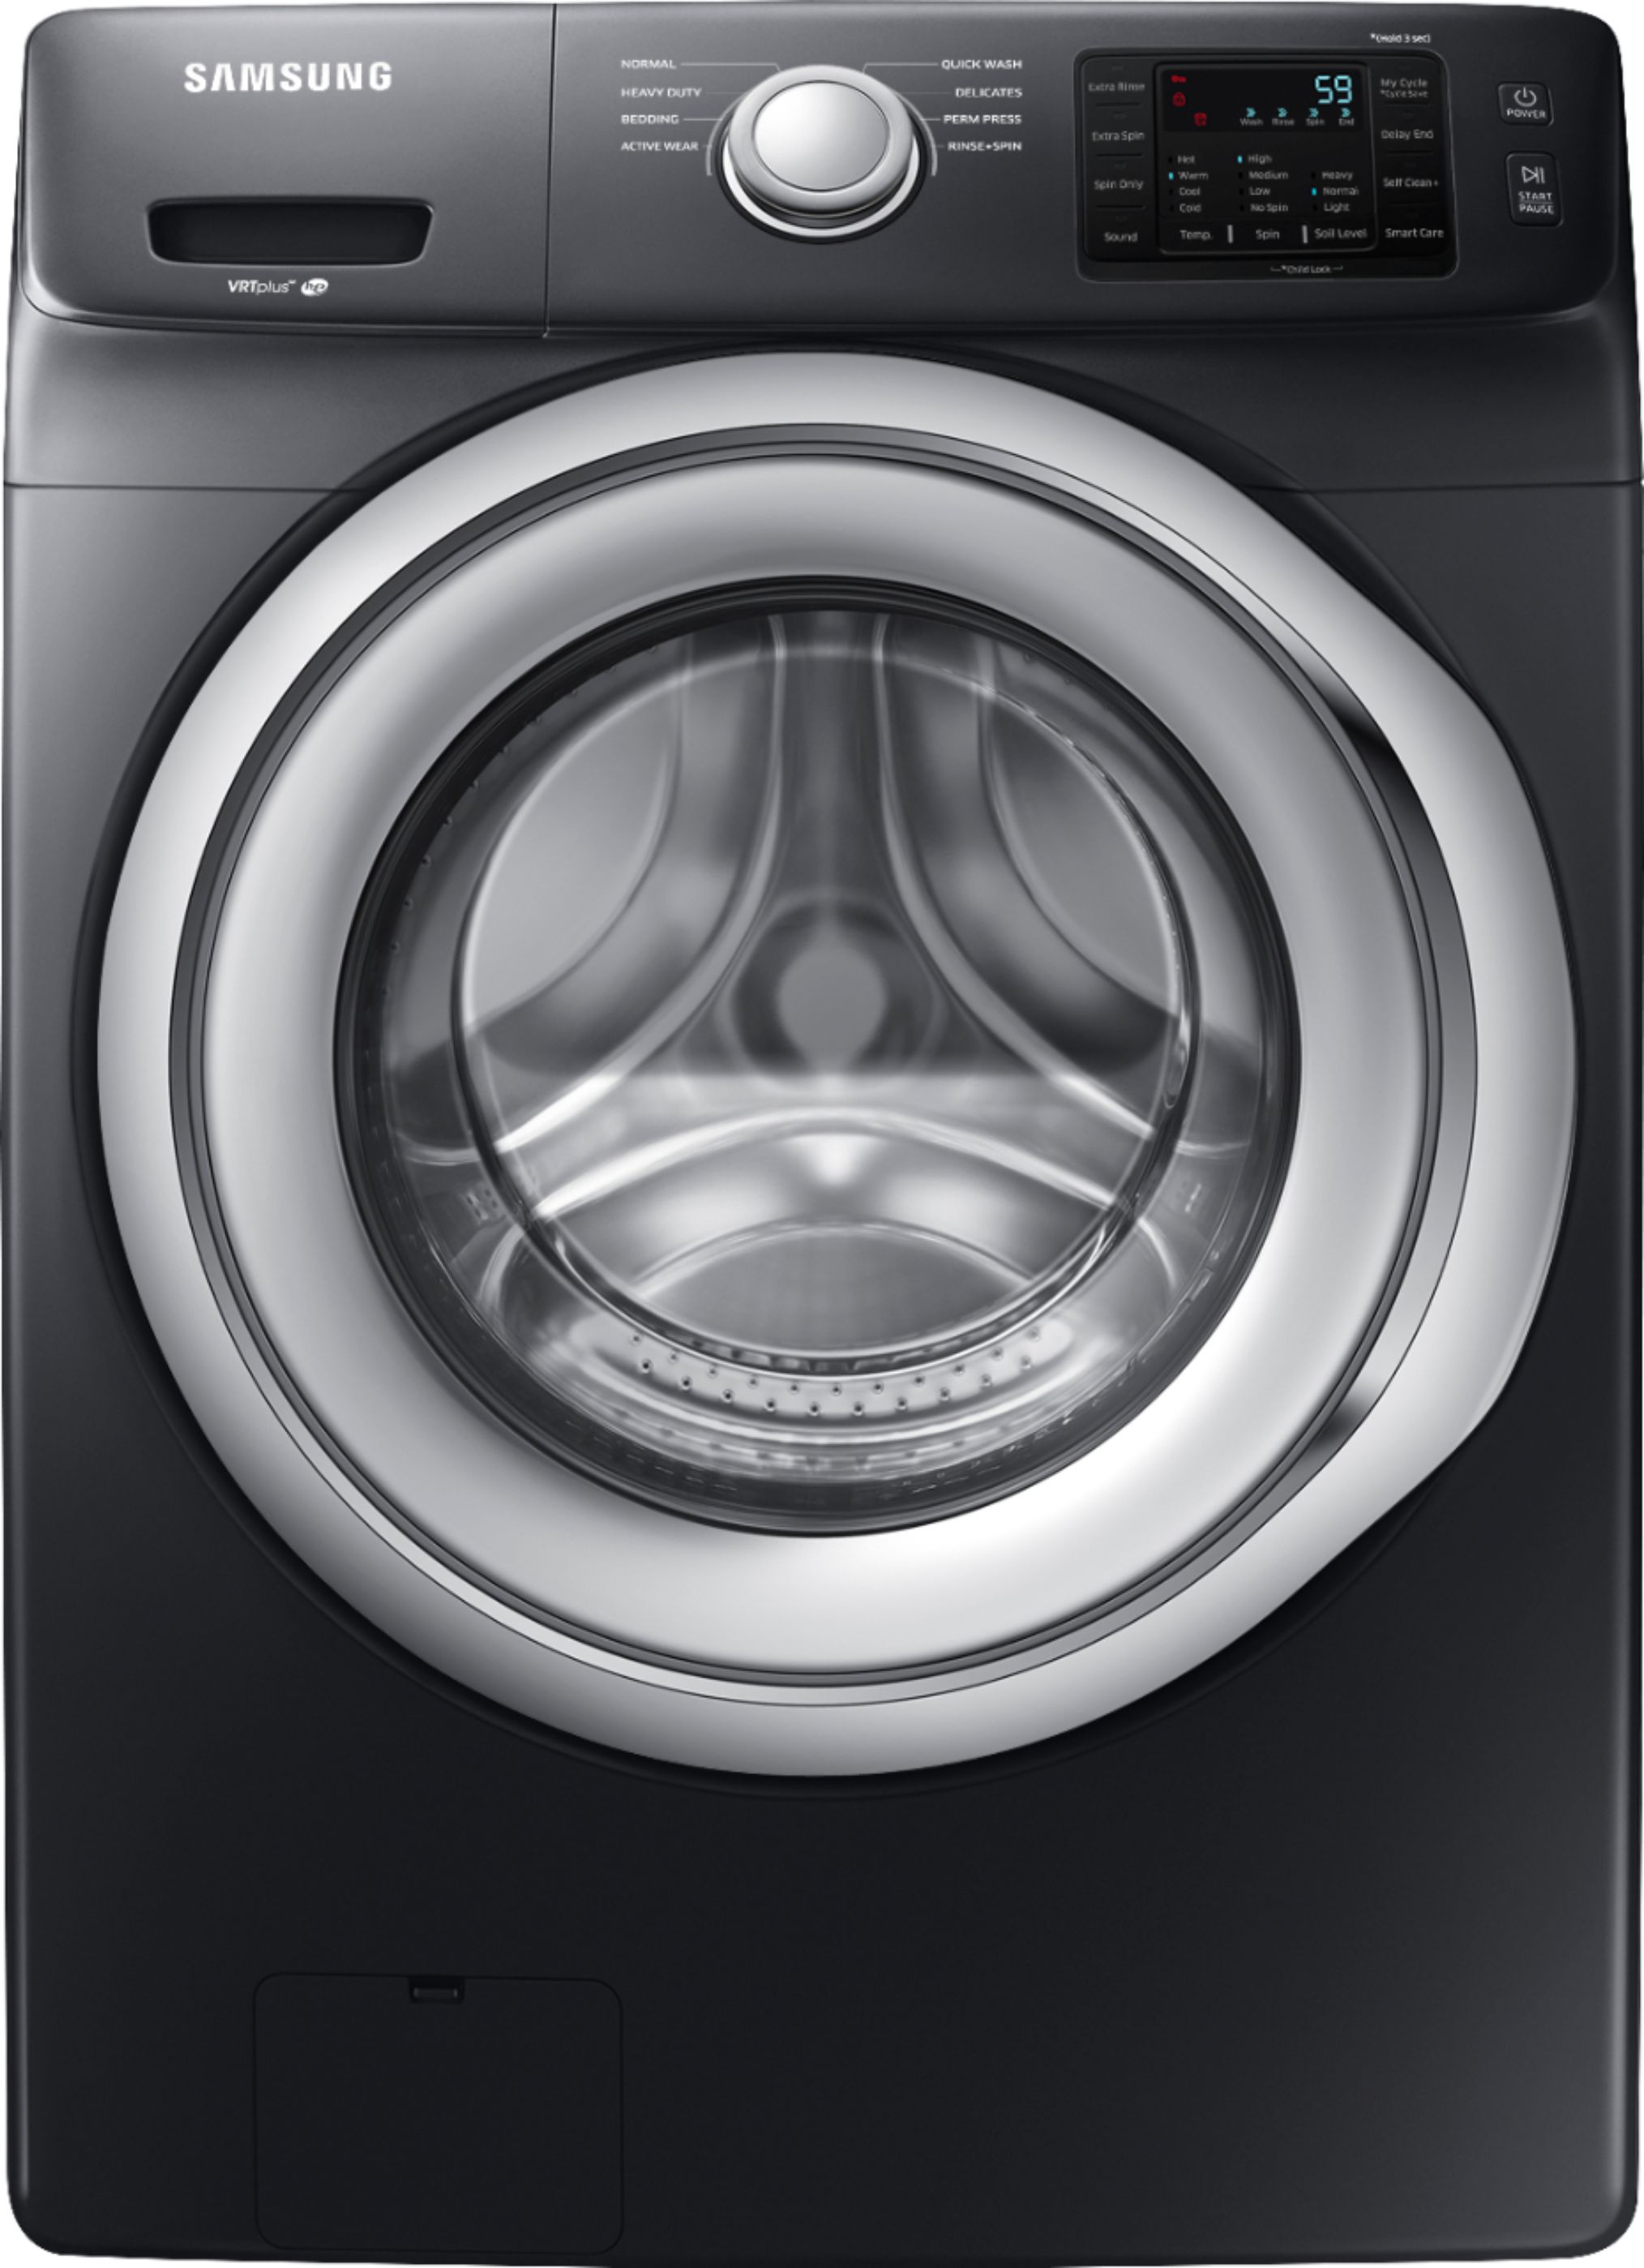 Samsung - 4.5 Cu. Ft. 8-Cycle Front-Loading Washer - Fingerprint Resistant Black Stainless Steel